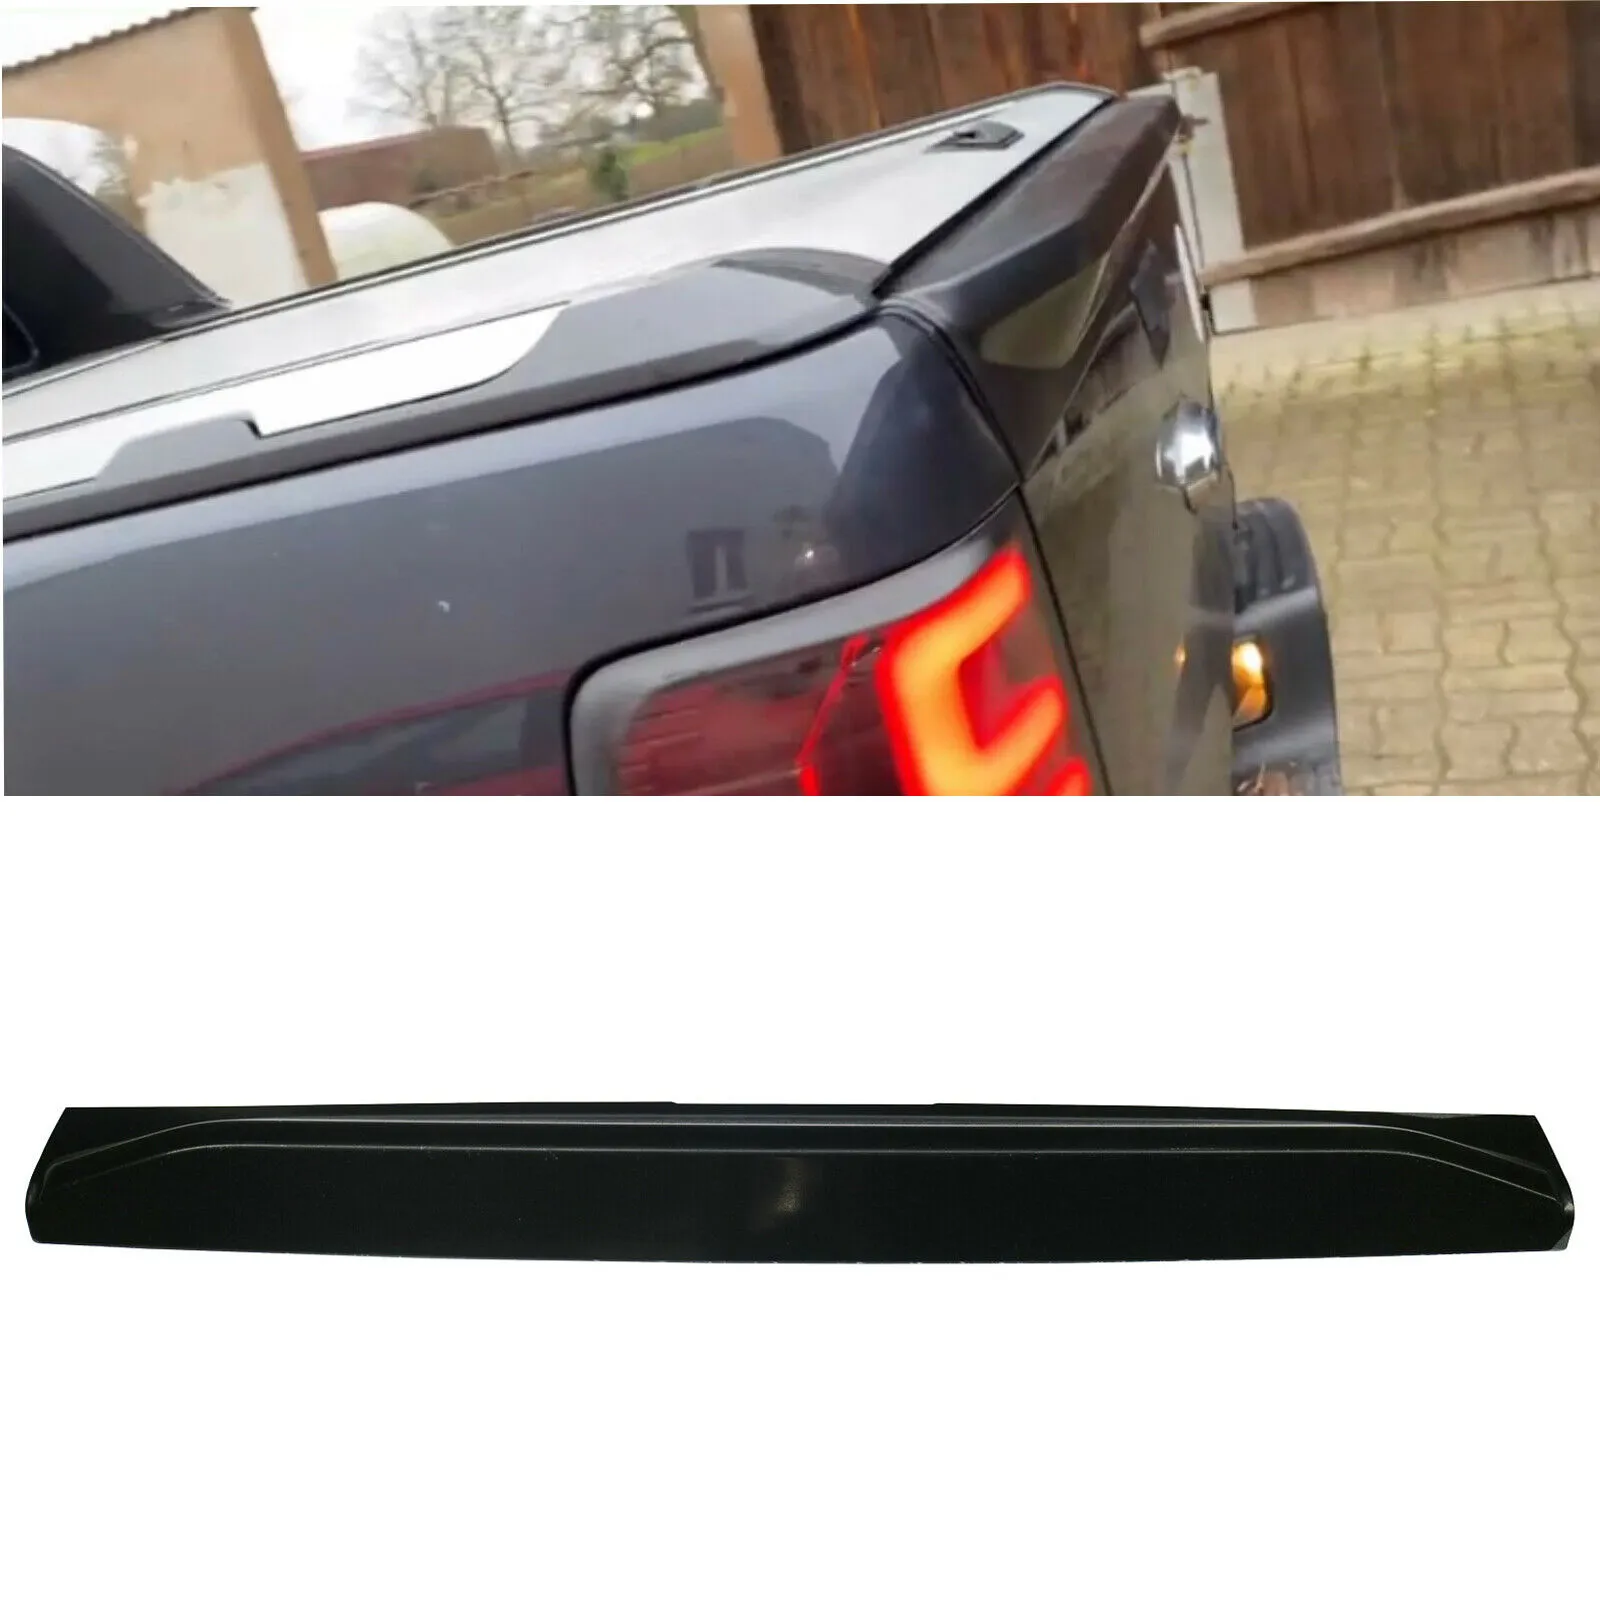 Car Accessories Tail Gate Protector Tailgate Cover Guard for Ford Ranger  2012-2022 T6 T7 T8 Wildtrak Matte Black 4x4 Car Styling